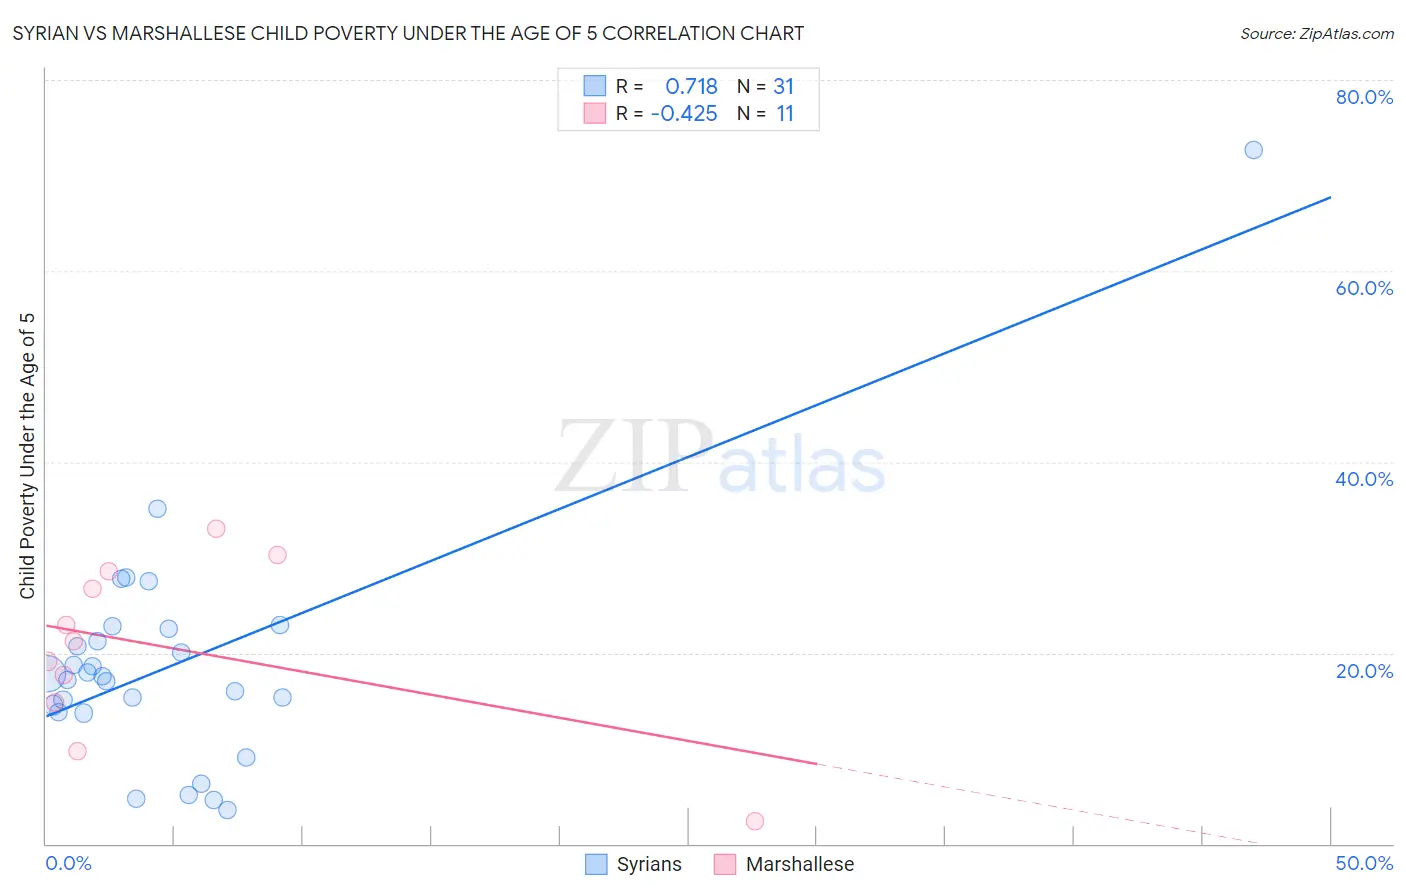 Syrian vs Marshallese Child Poverty Under the Age of 5